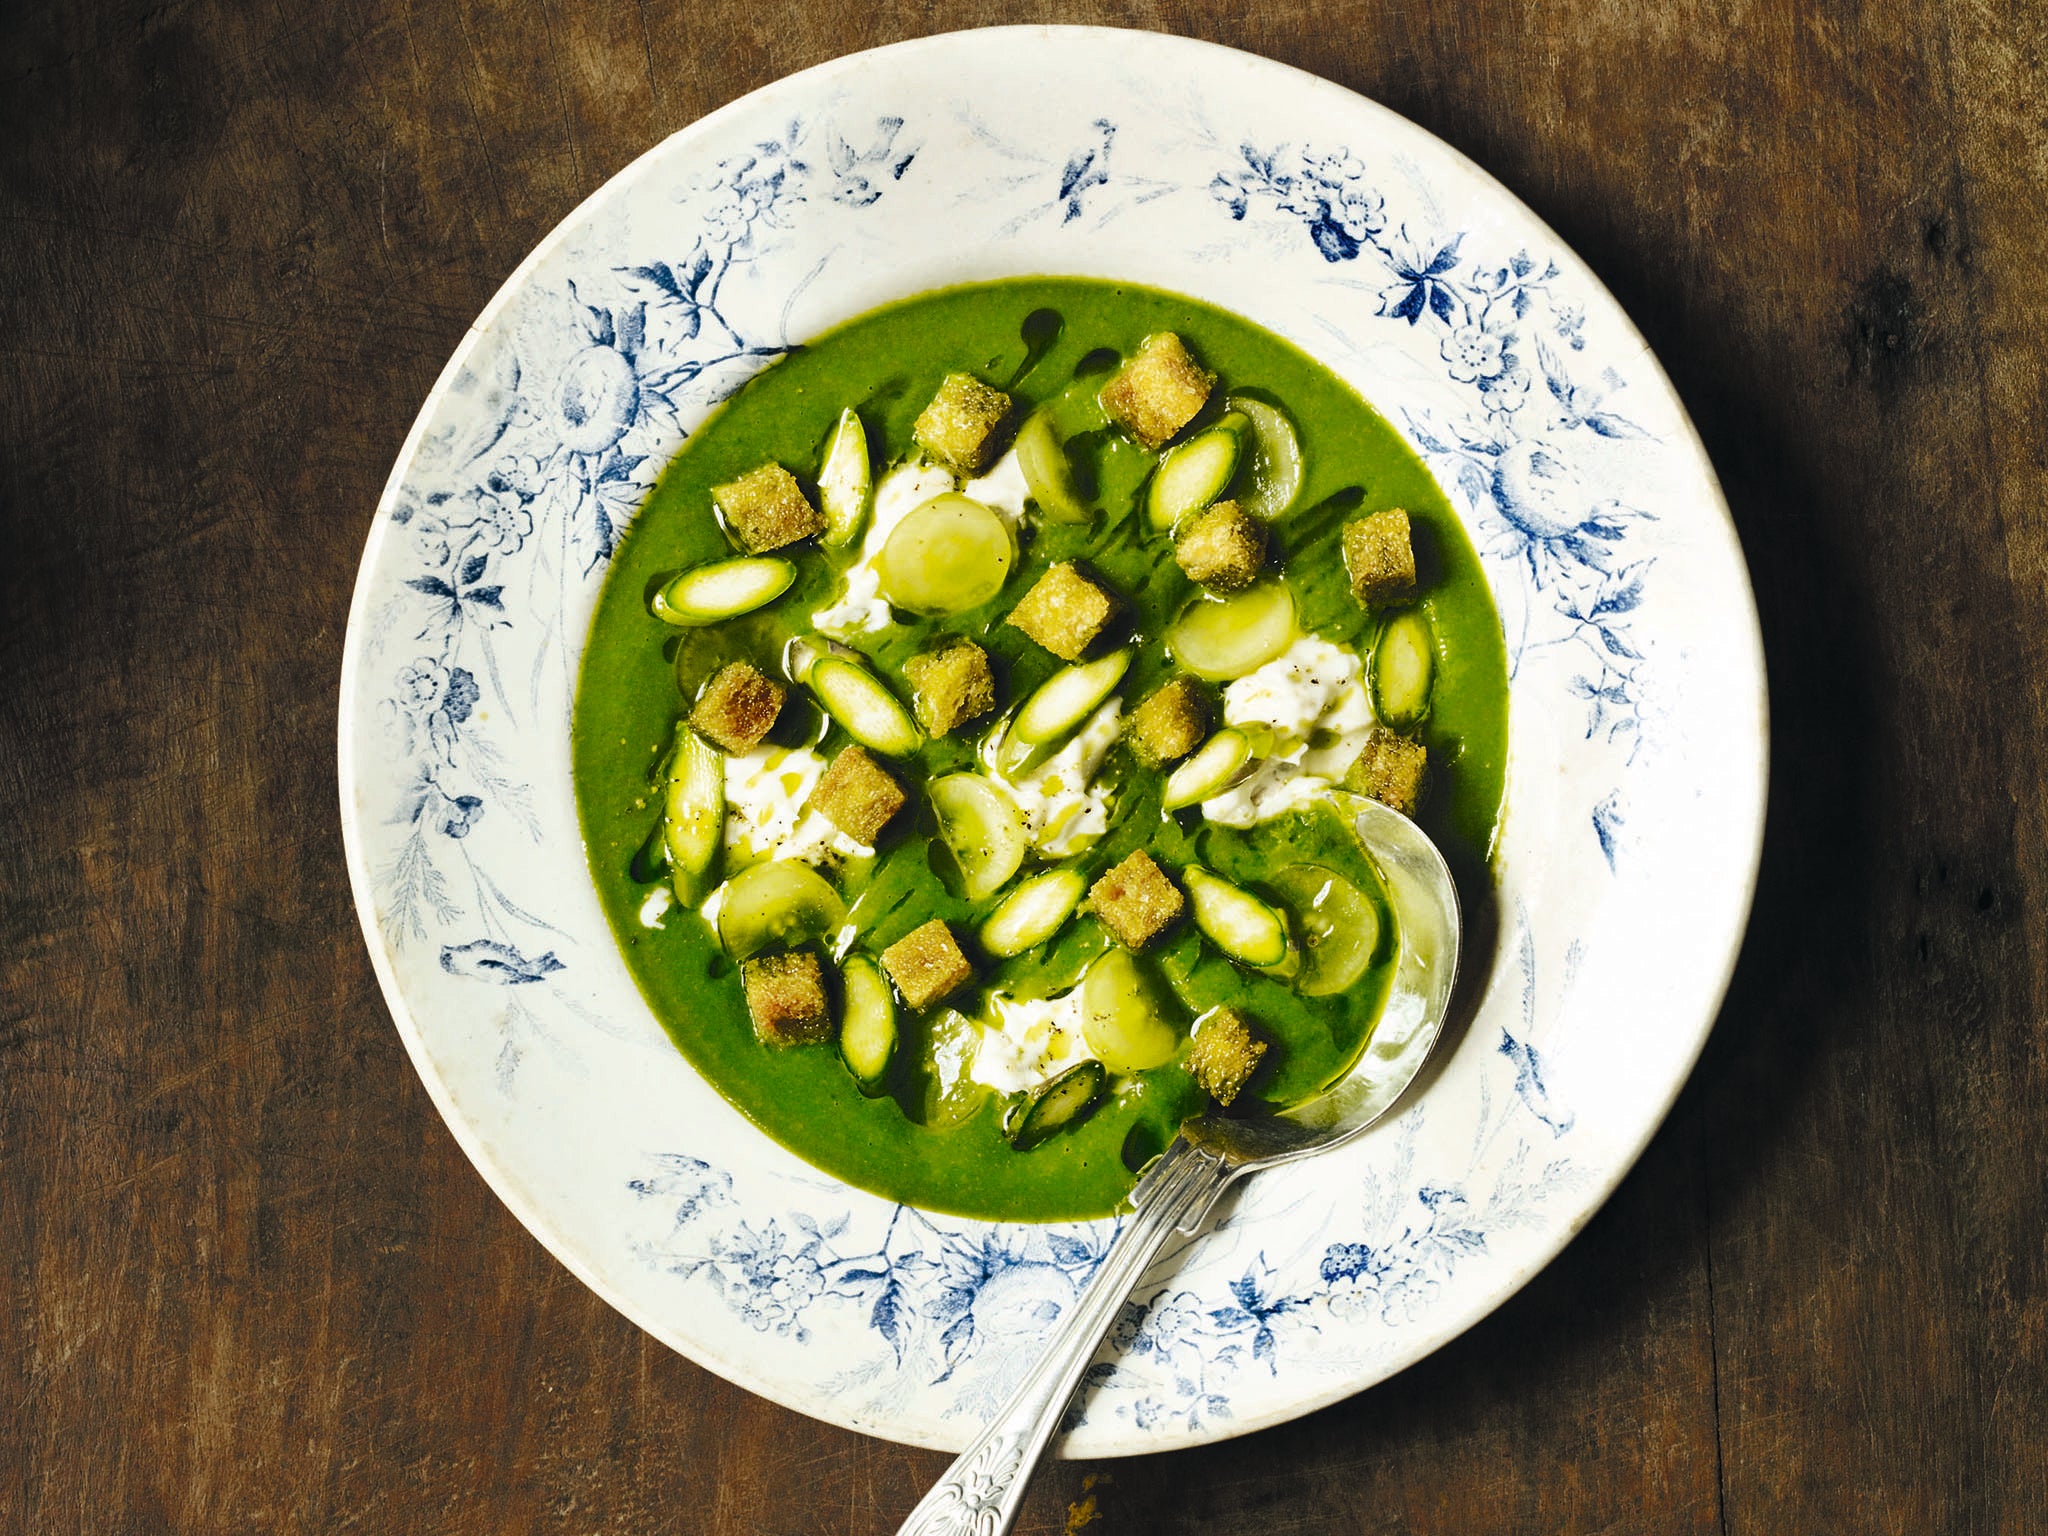 Lovage pairs brilliantly with gorgonzola, asparagus and grapes